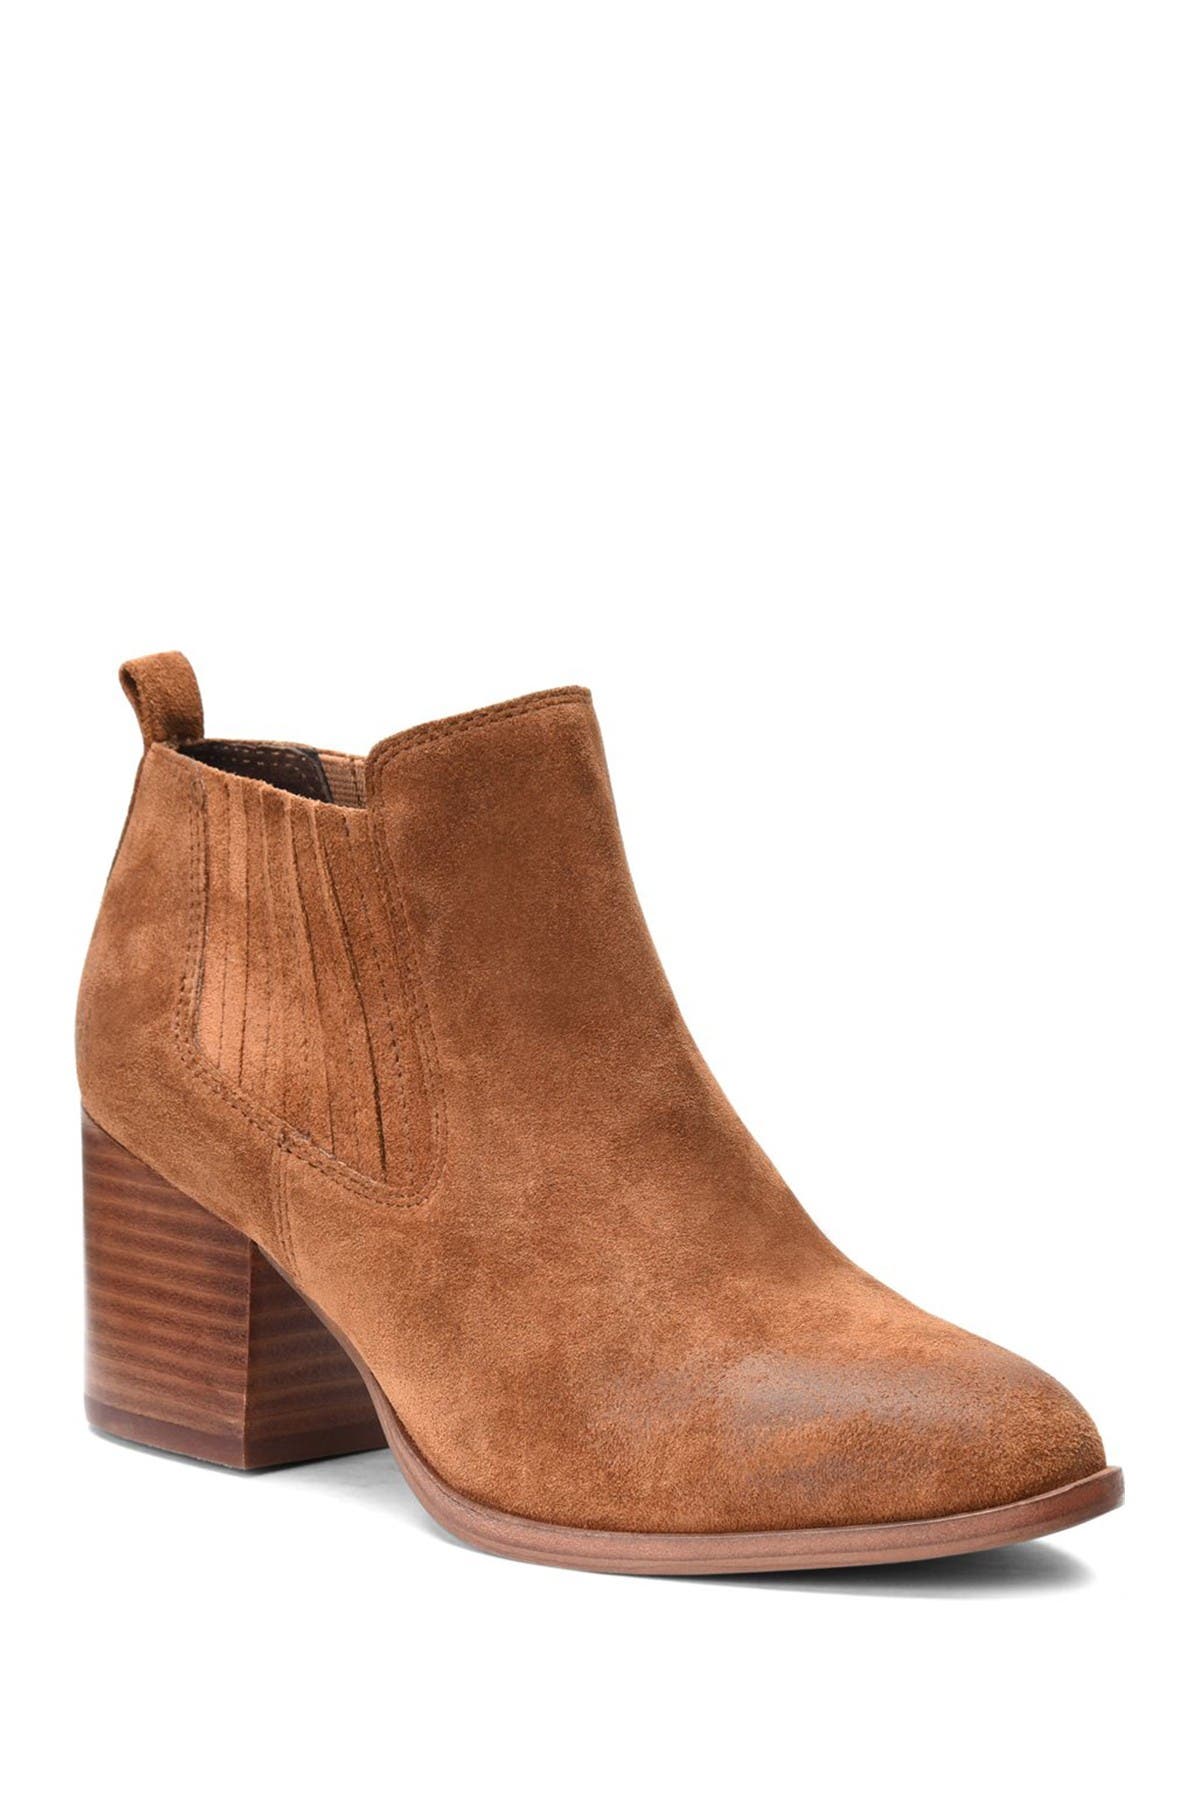 Isola | Olicia Ankle Boot | Nordstrom Rack